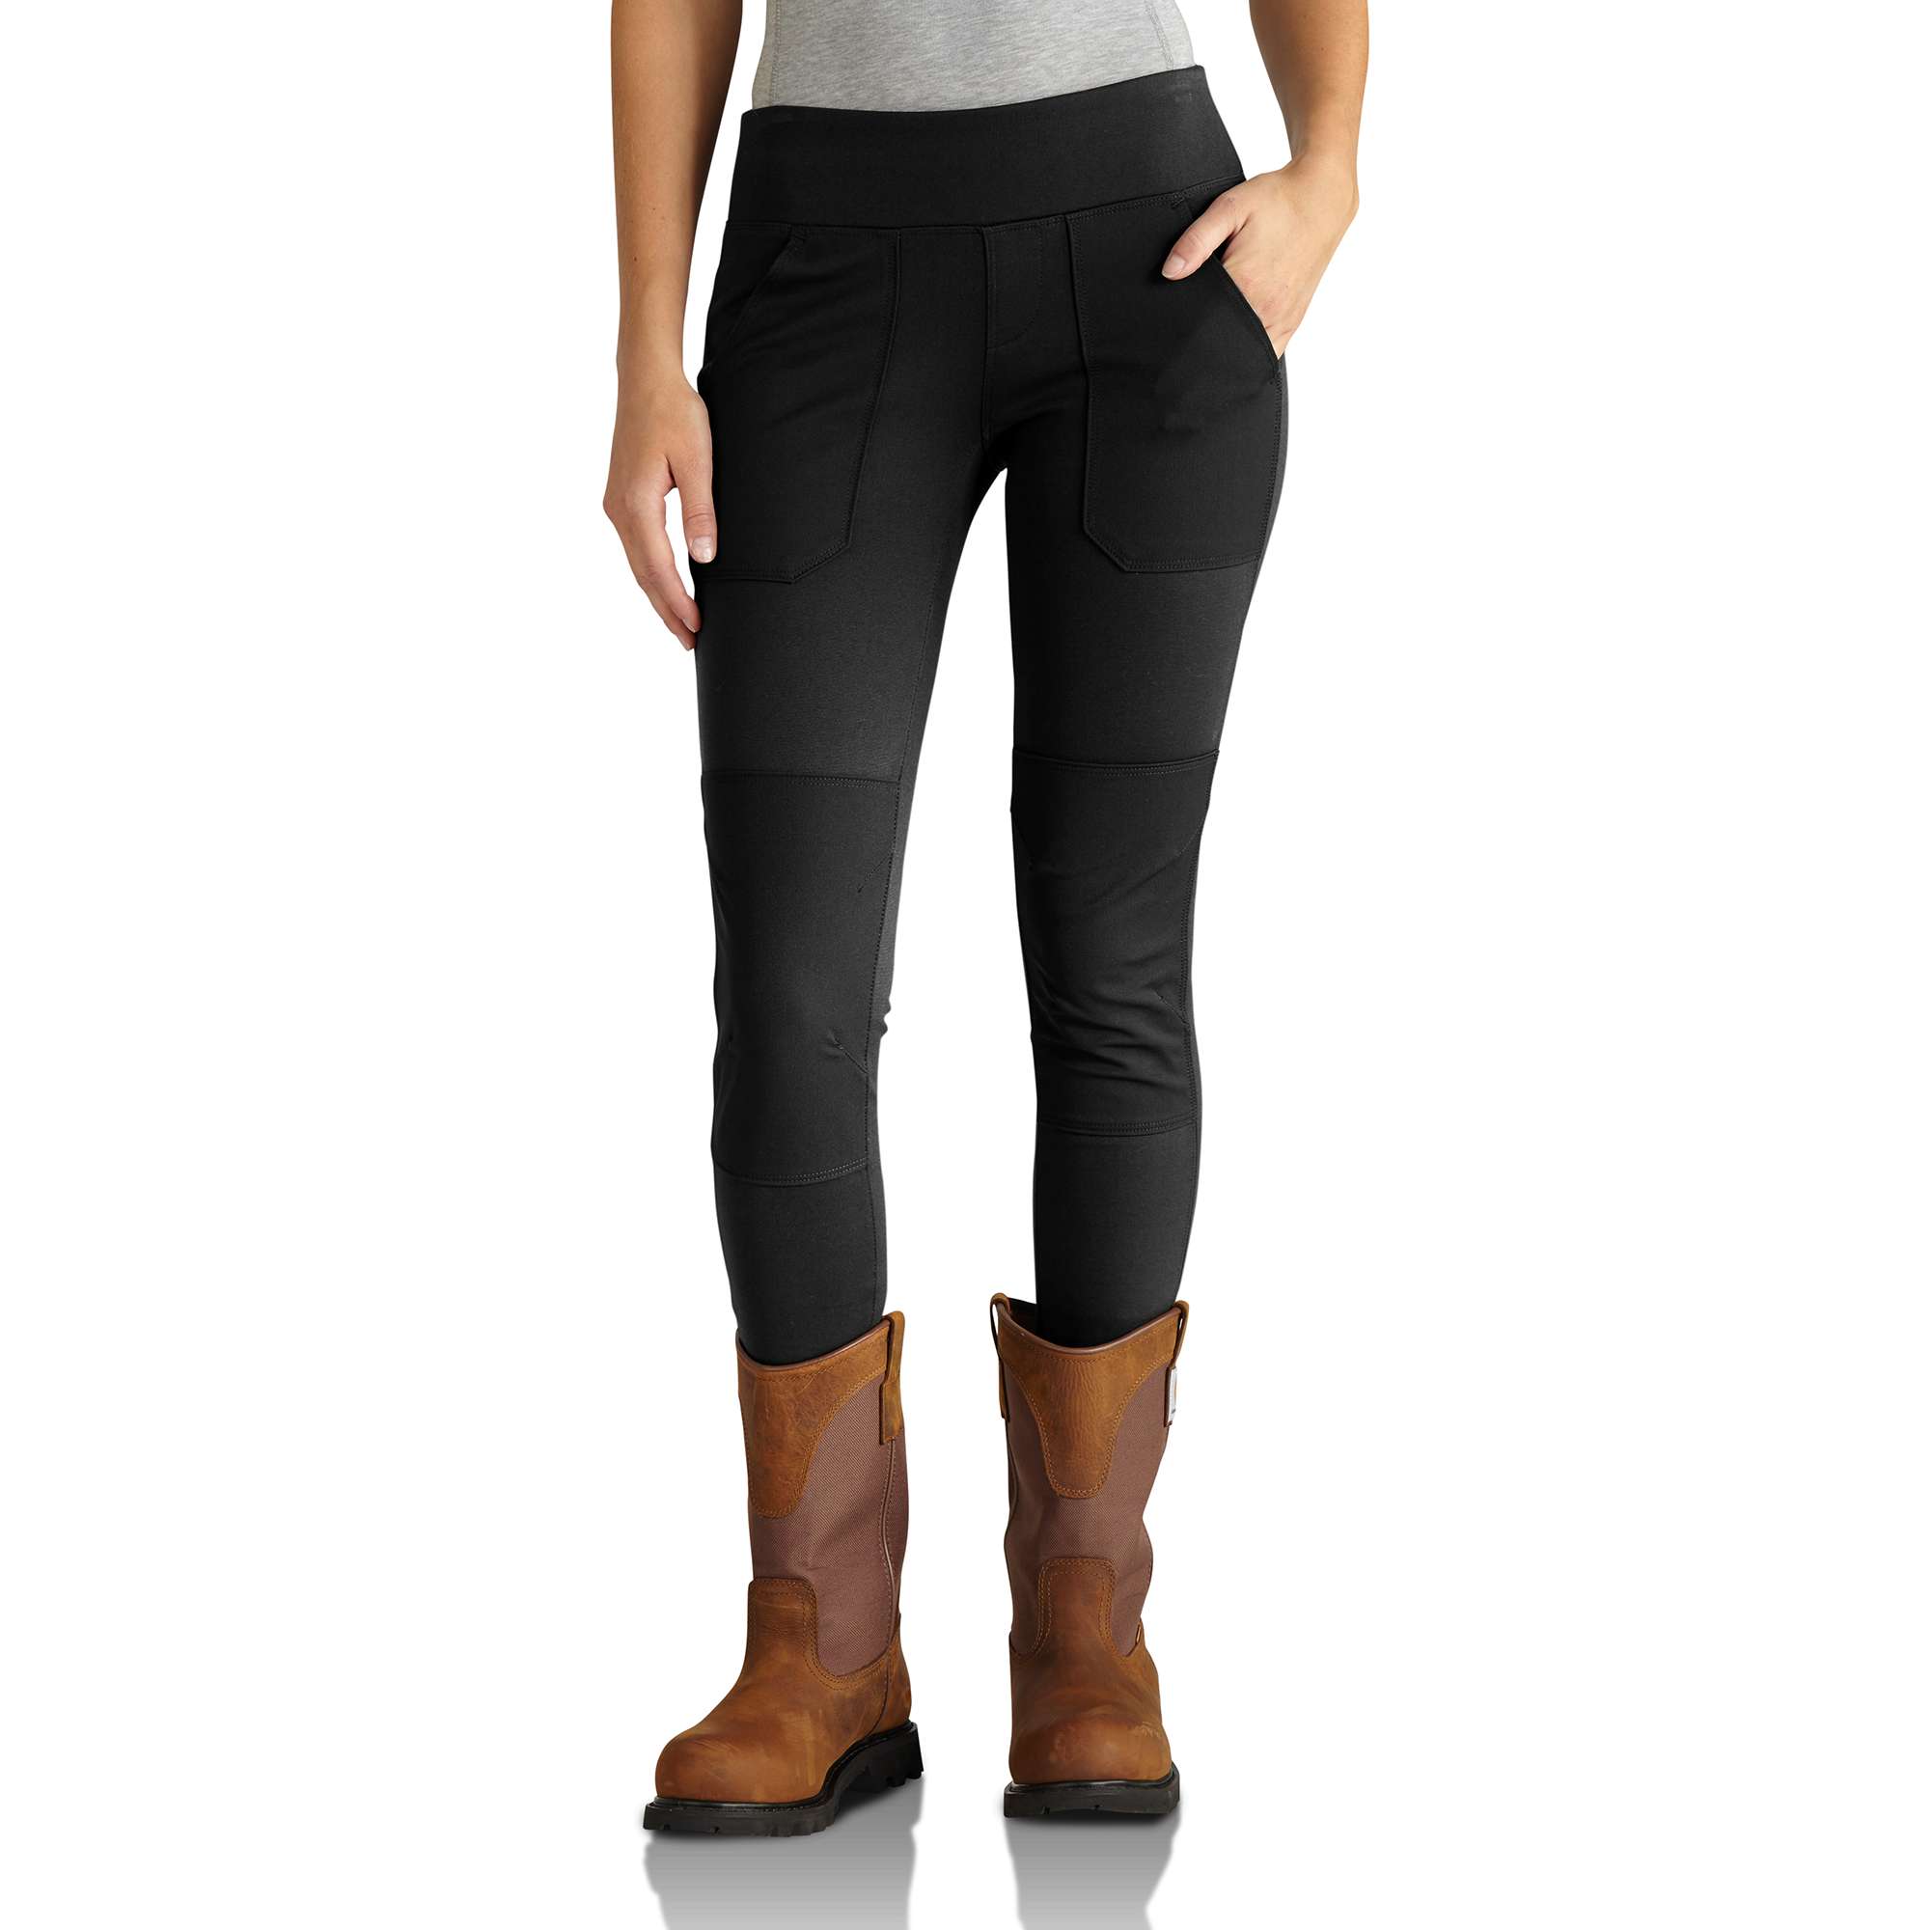 Carhartt Women's Skinny Fit Black Knit (Large) in the Pants